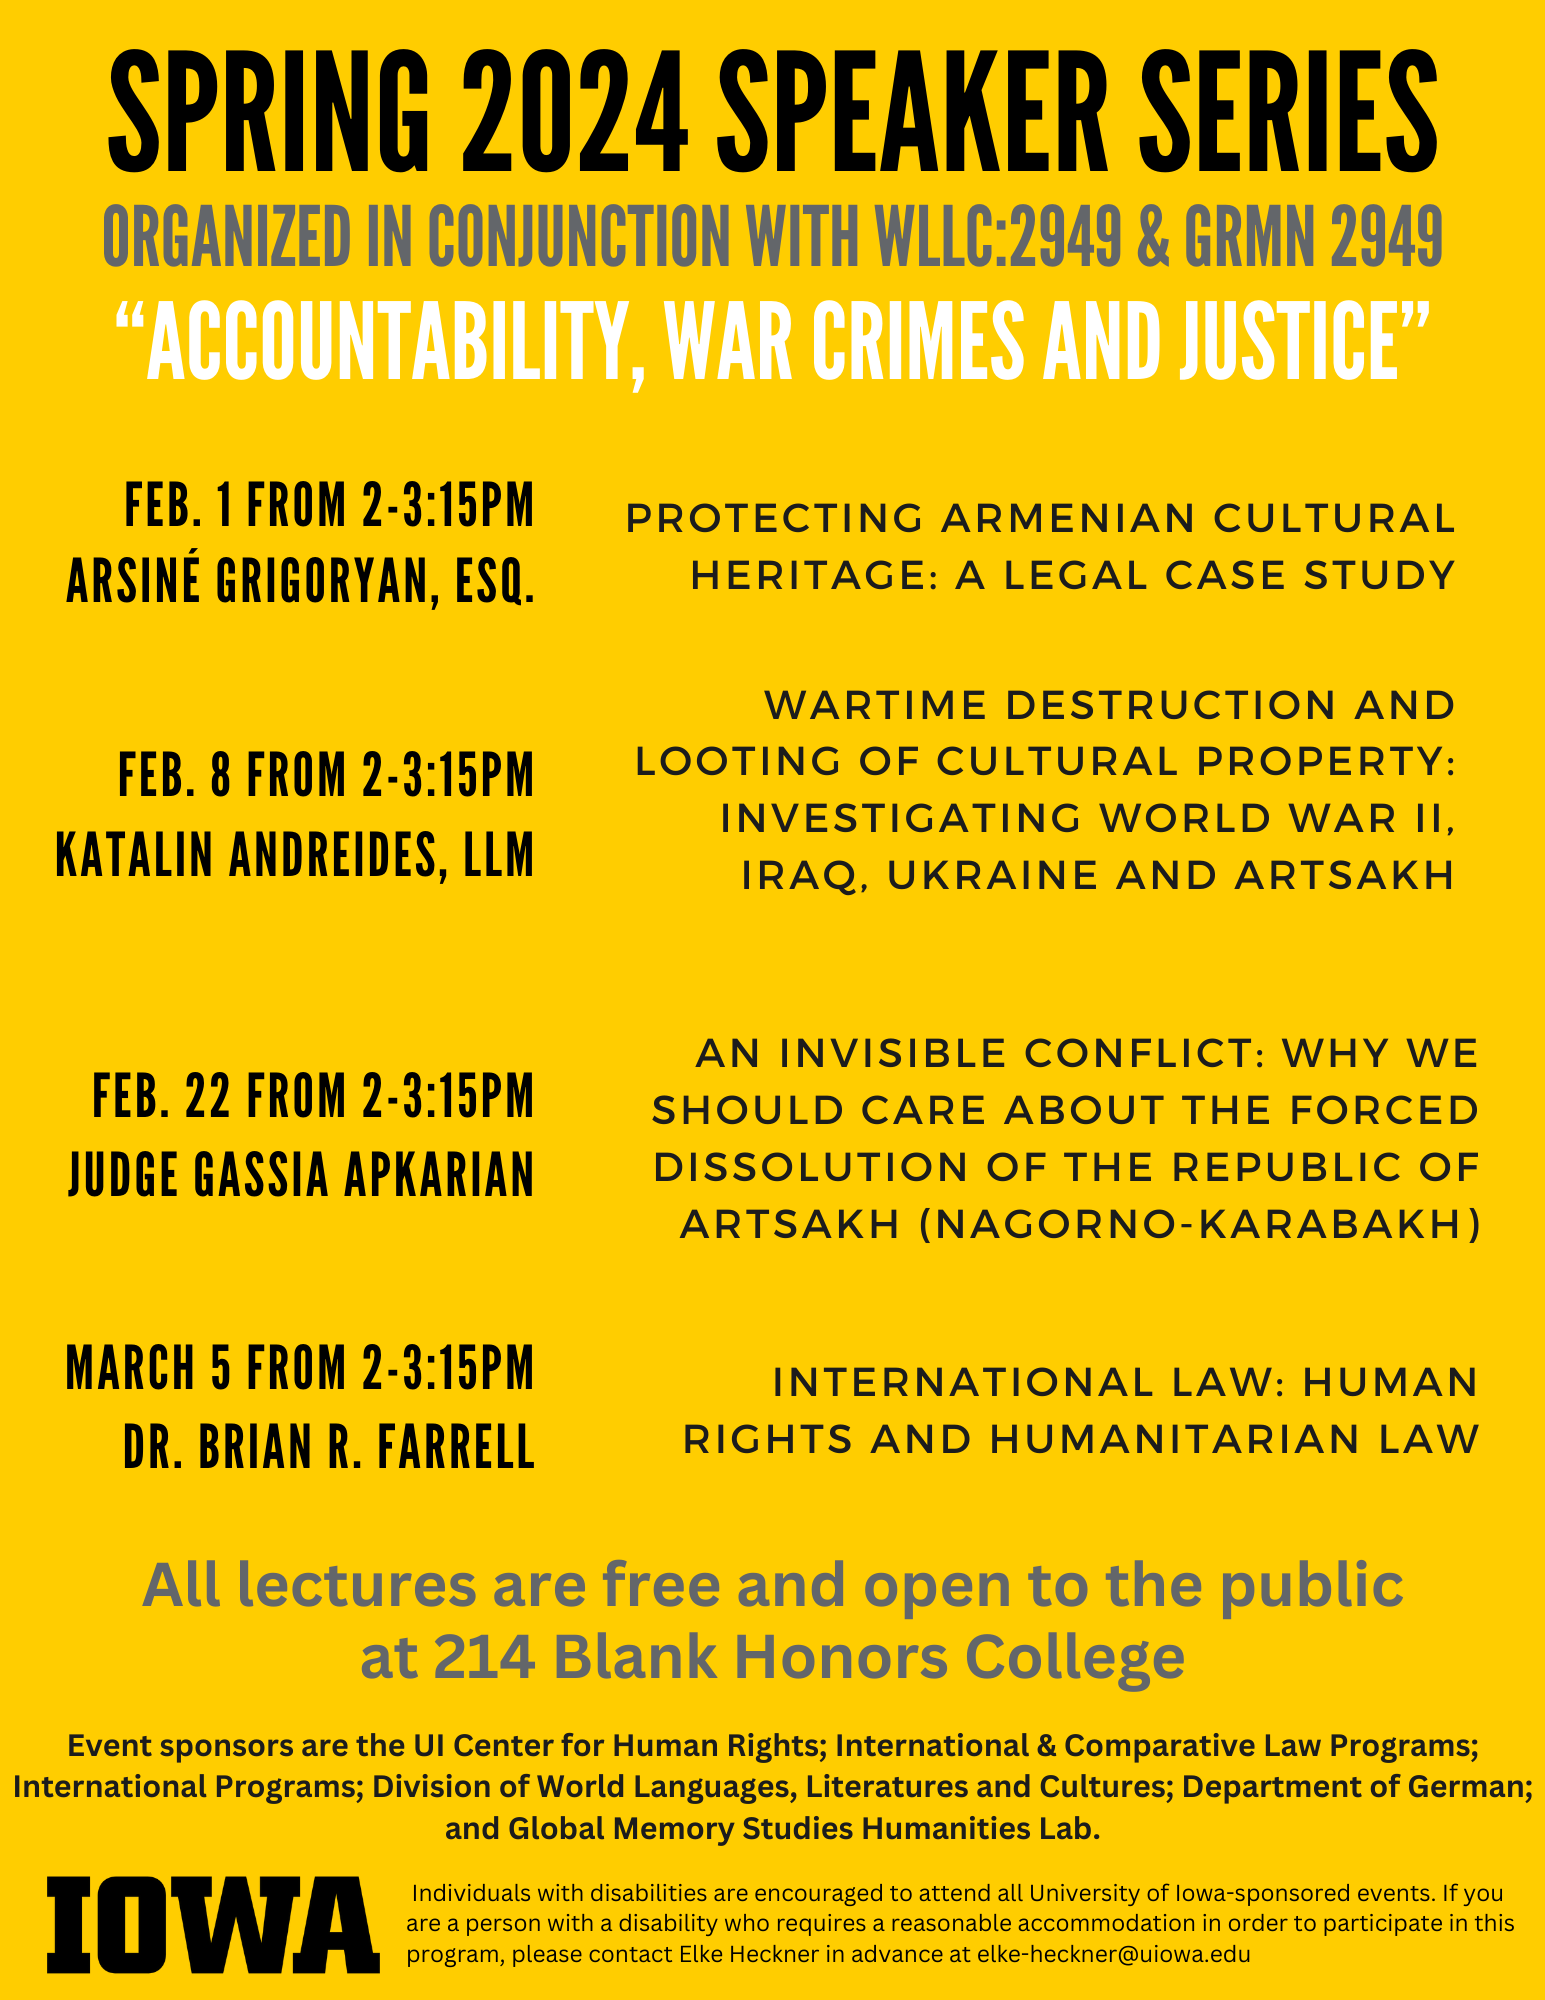 Spring 2024 Speaker Series - Accountability, War Crimes, and Justice - March 5th Dr. Brian R. Farrell - International Law: Human Rights and Humanitarian Law - 214 Blank Honors College